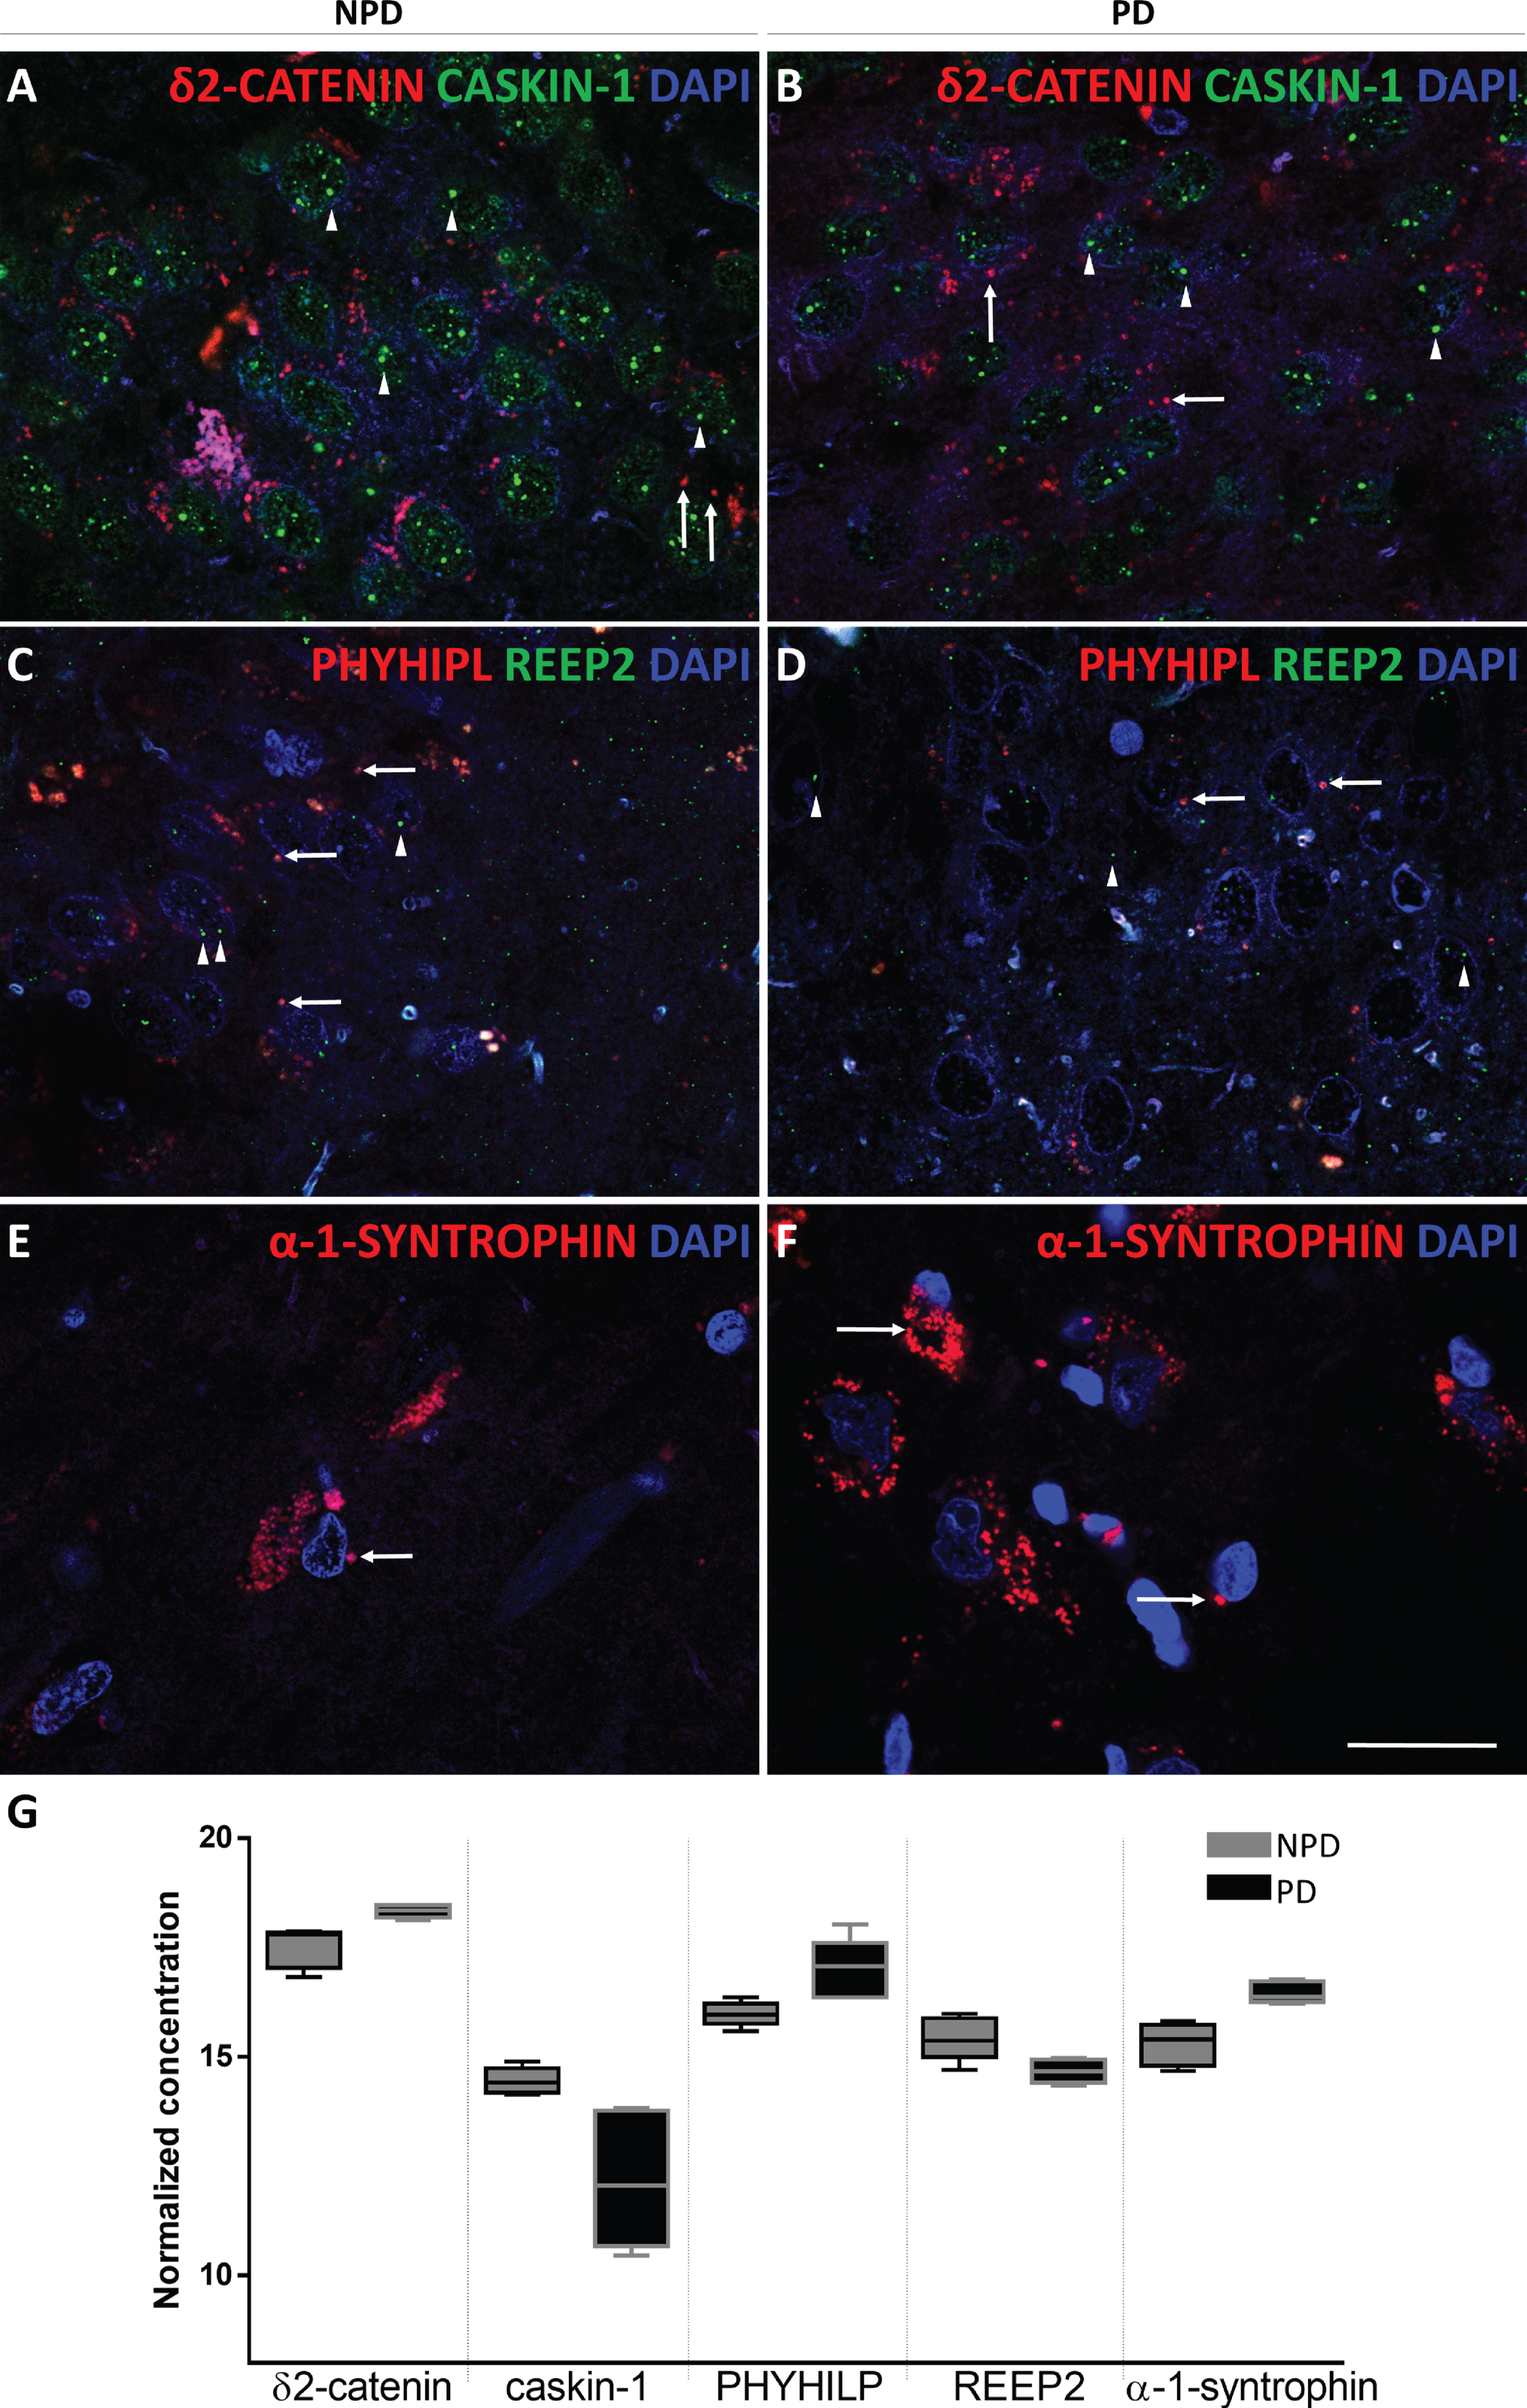 Coronal sections of the human hippocampus immunofluorescently stained for δ2-catenin (RED) and caskin-1 (GREEN) in NPD (A) and PD (B), REEP2 (GREEN) and PHYHIPL (RED) in NPD (C) and PD (D) and α-syntrophin (RED) in NPD (E) and NPD (F). Arrow heads and arrows point green and red markers, respectively. Scale bar 20μm (A-F). The mean±SD of selected proteins comparing NPD and PD (G).